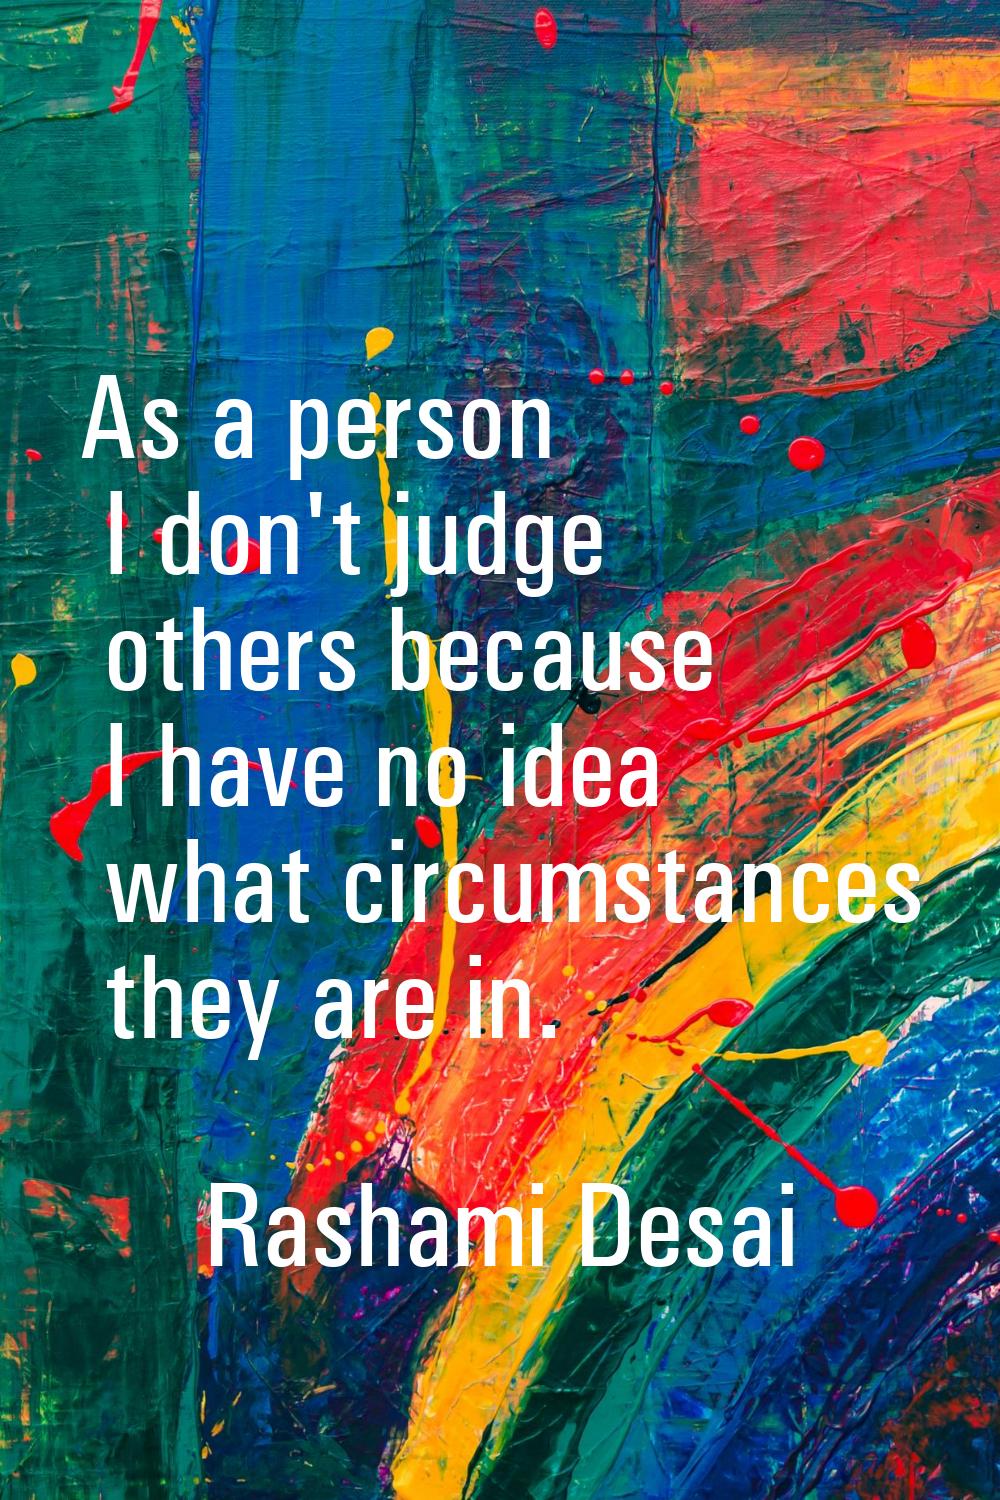 As a person I don't judge others because I have no idea what circumstances they are in.